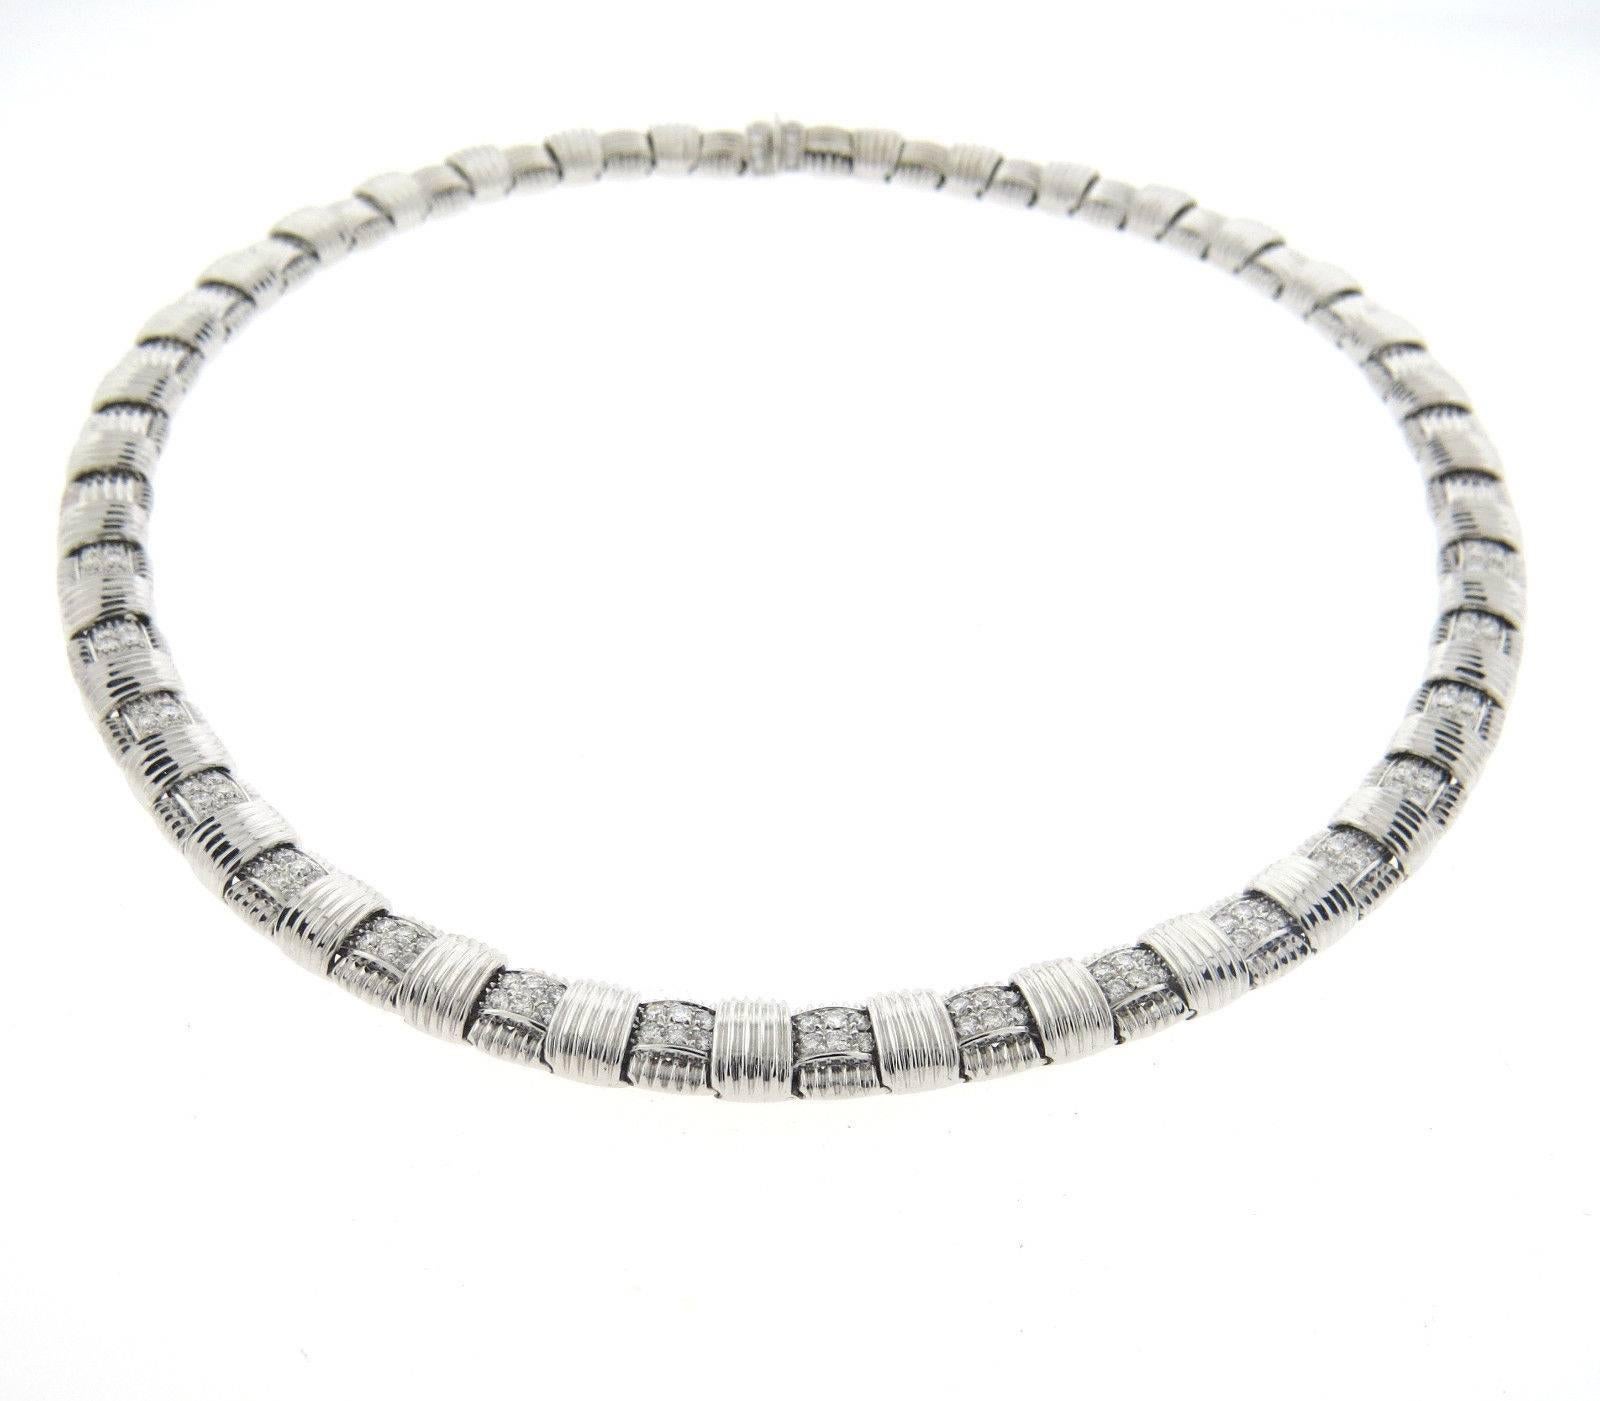 An 18k white gold necklace set with approximately 2.30ctw of G/VS diamonds.  Crafted by Roberto Coin for the Appassionata Collection, the necklace is  16 1/2